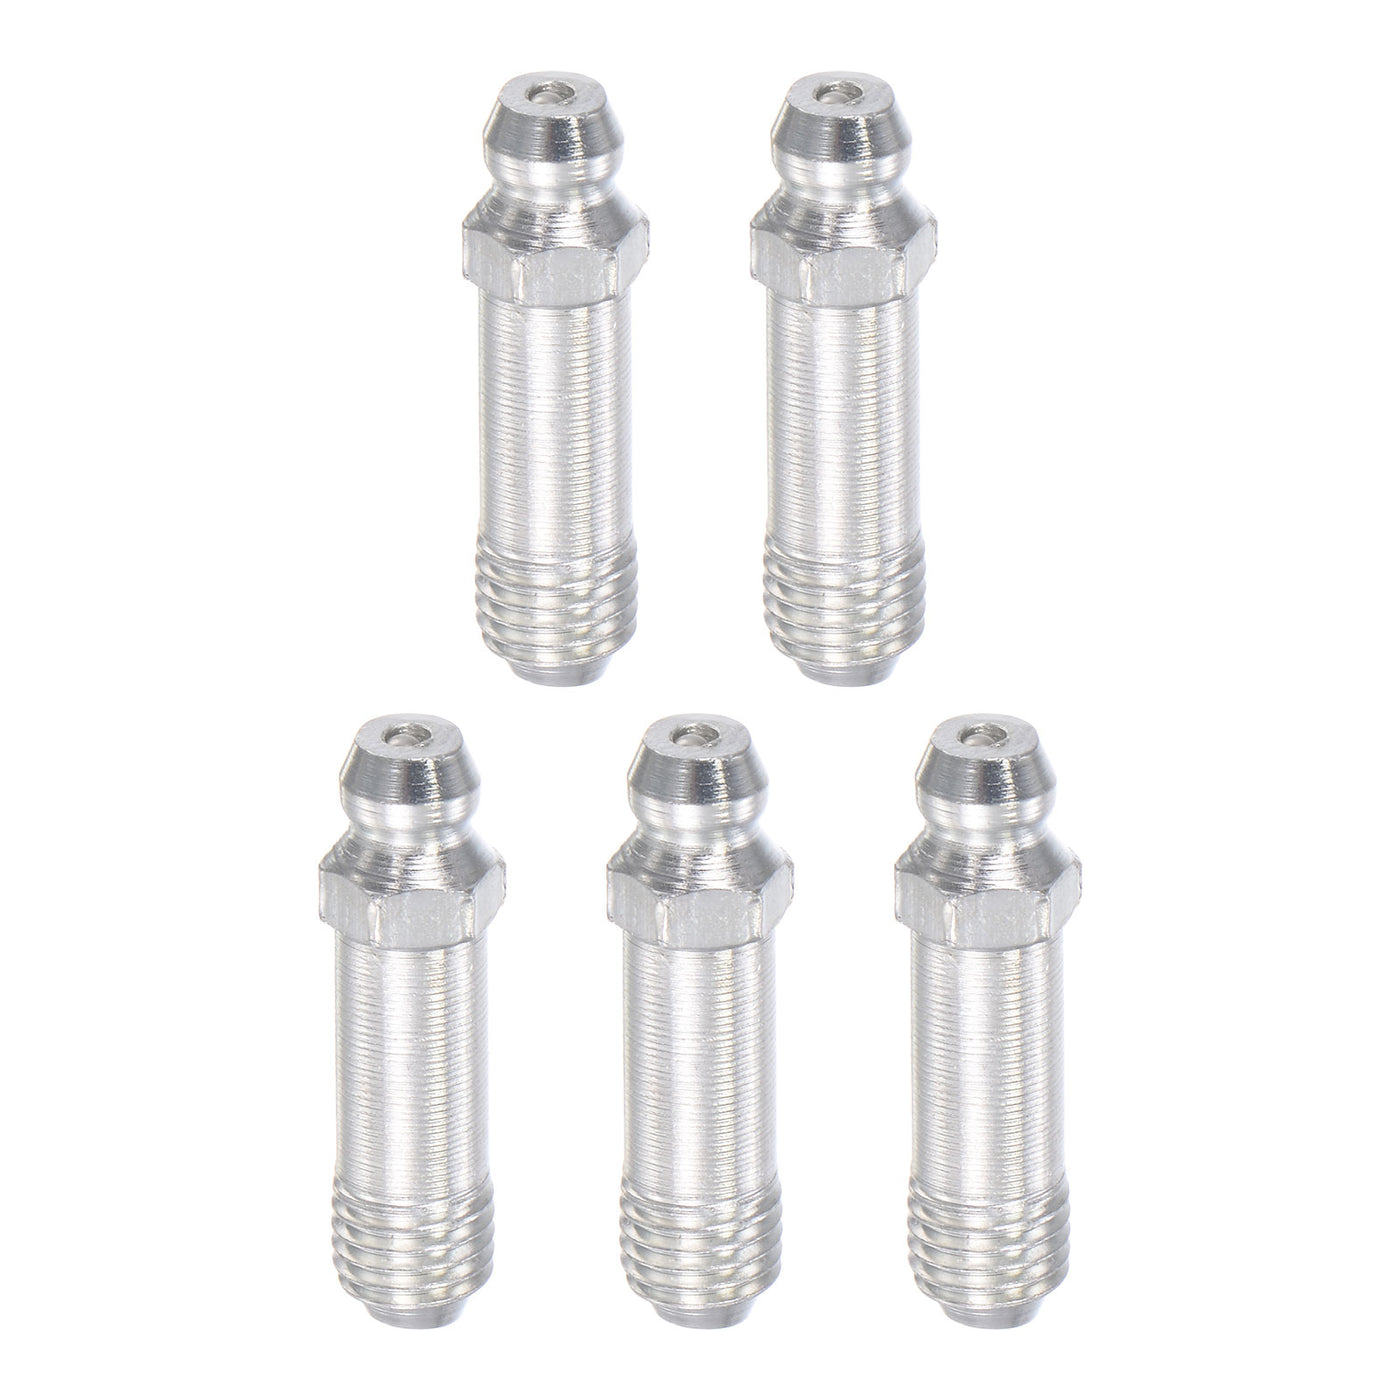 Uxcell Uxcell Steel Straight Hydraulic Grease Fitting Accessories M10 x 1mm Thread, 5Pcs